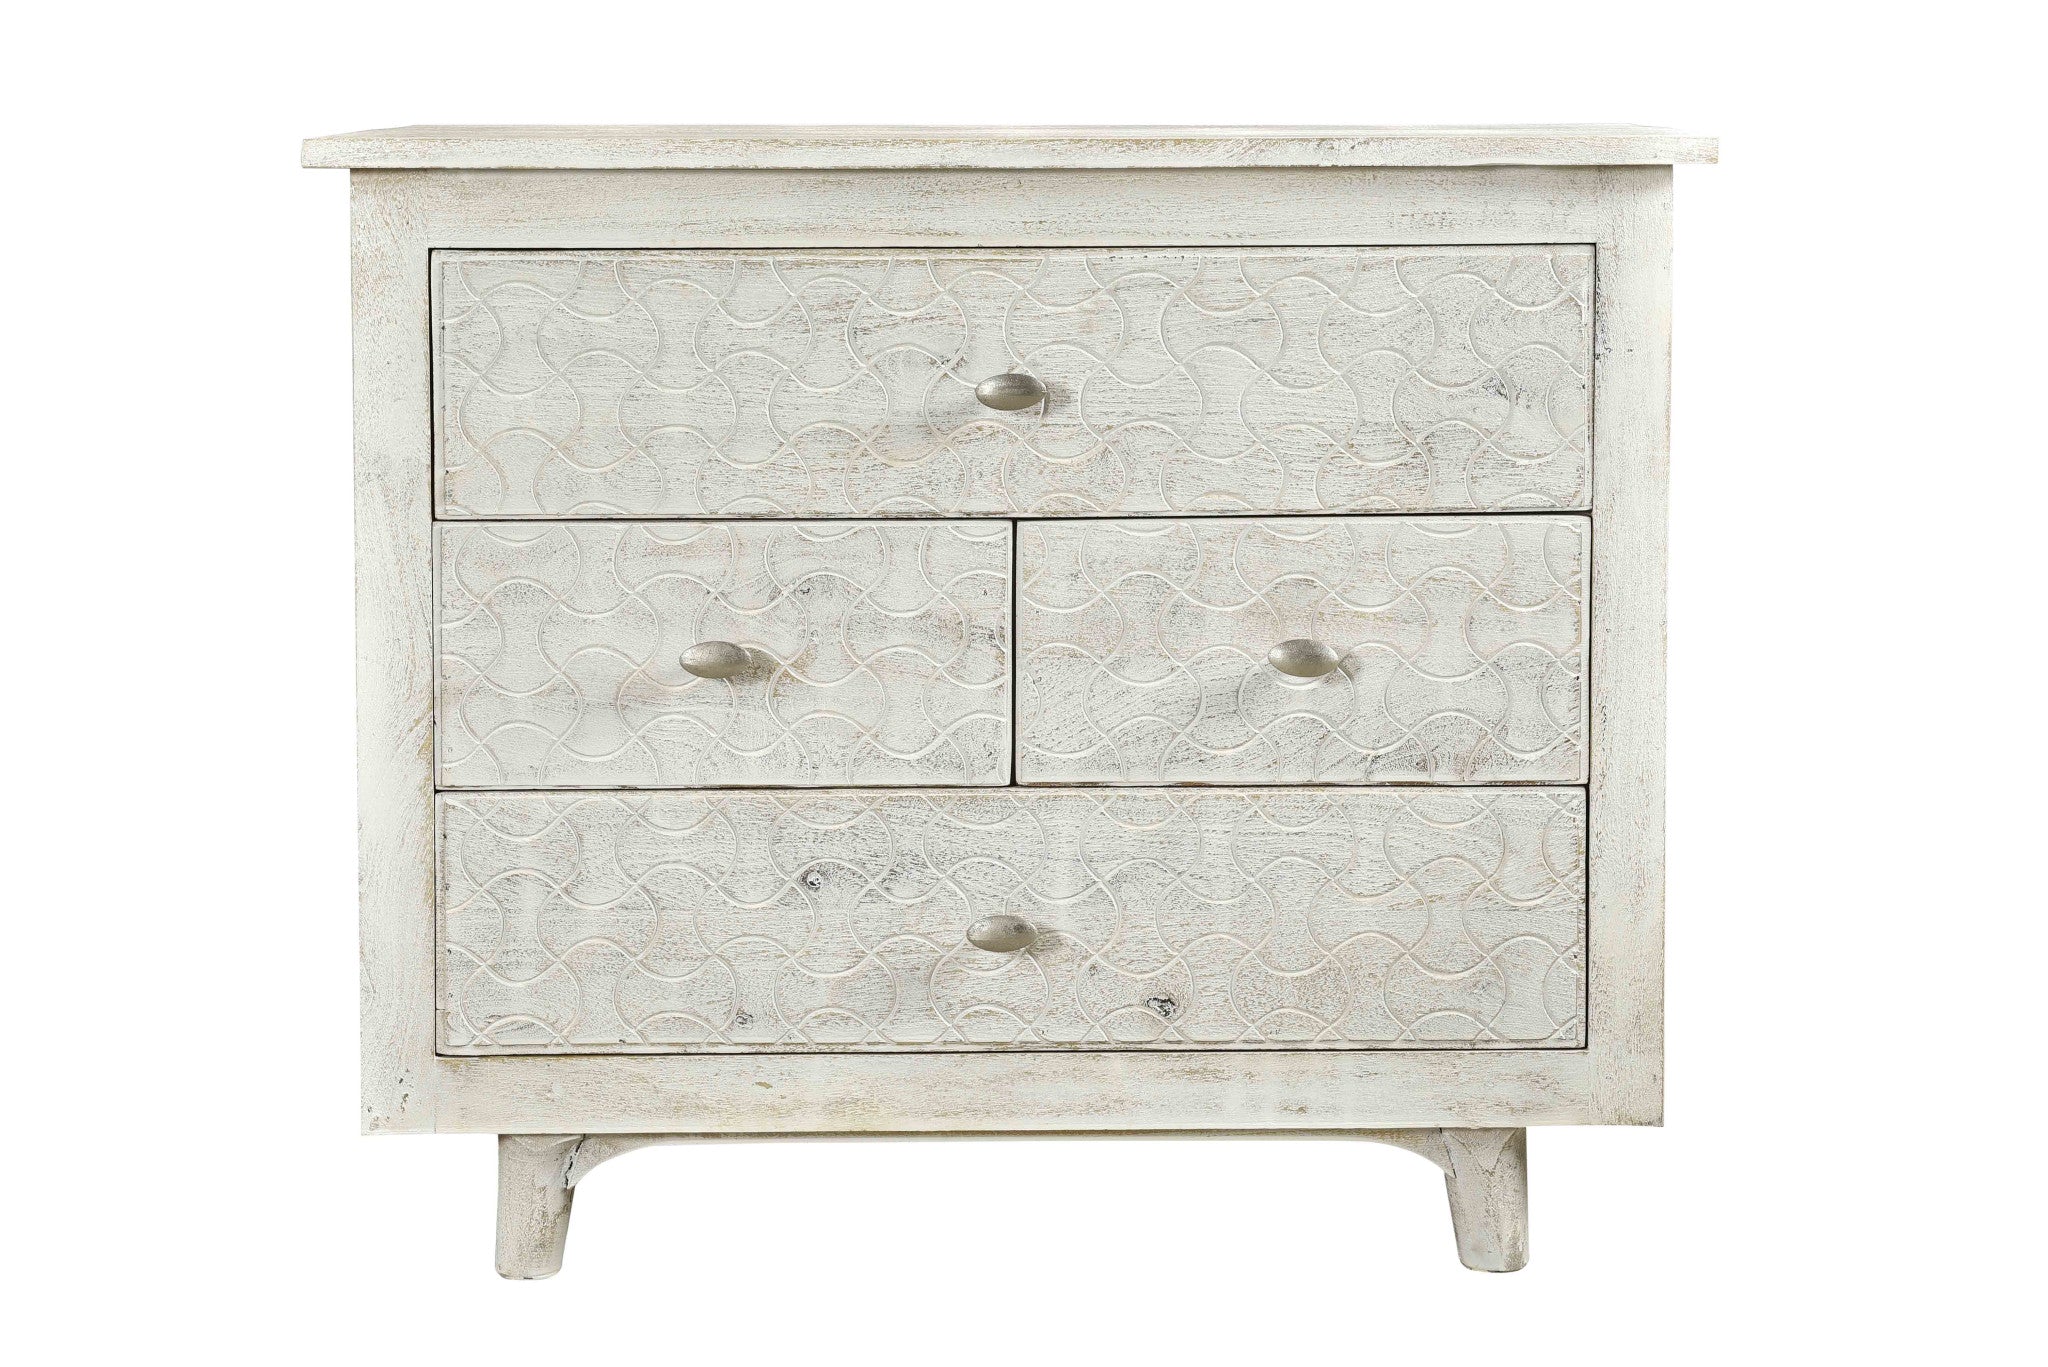 30" White Four Drawer Nightstand